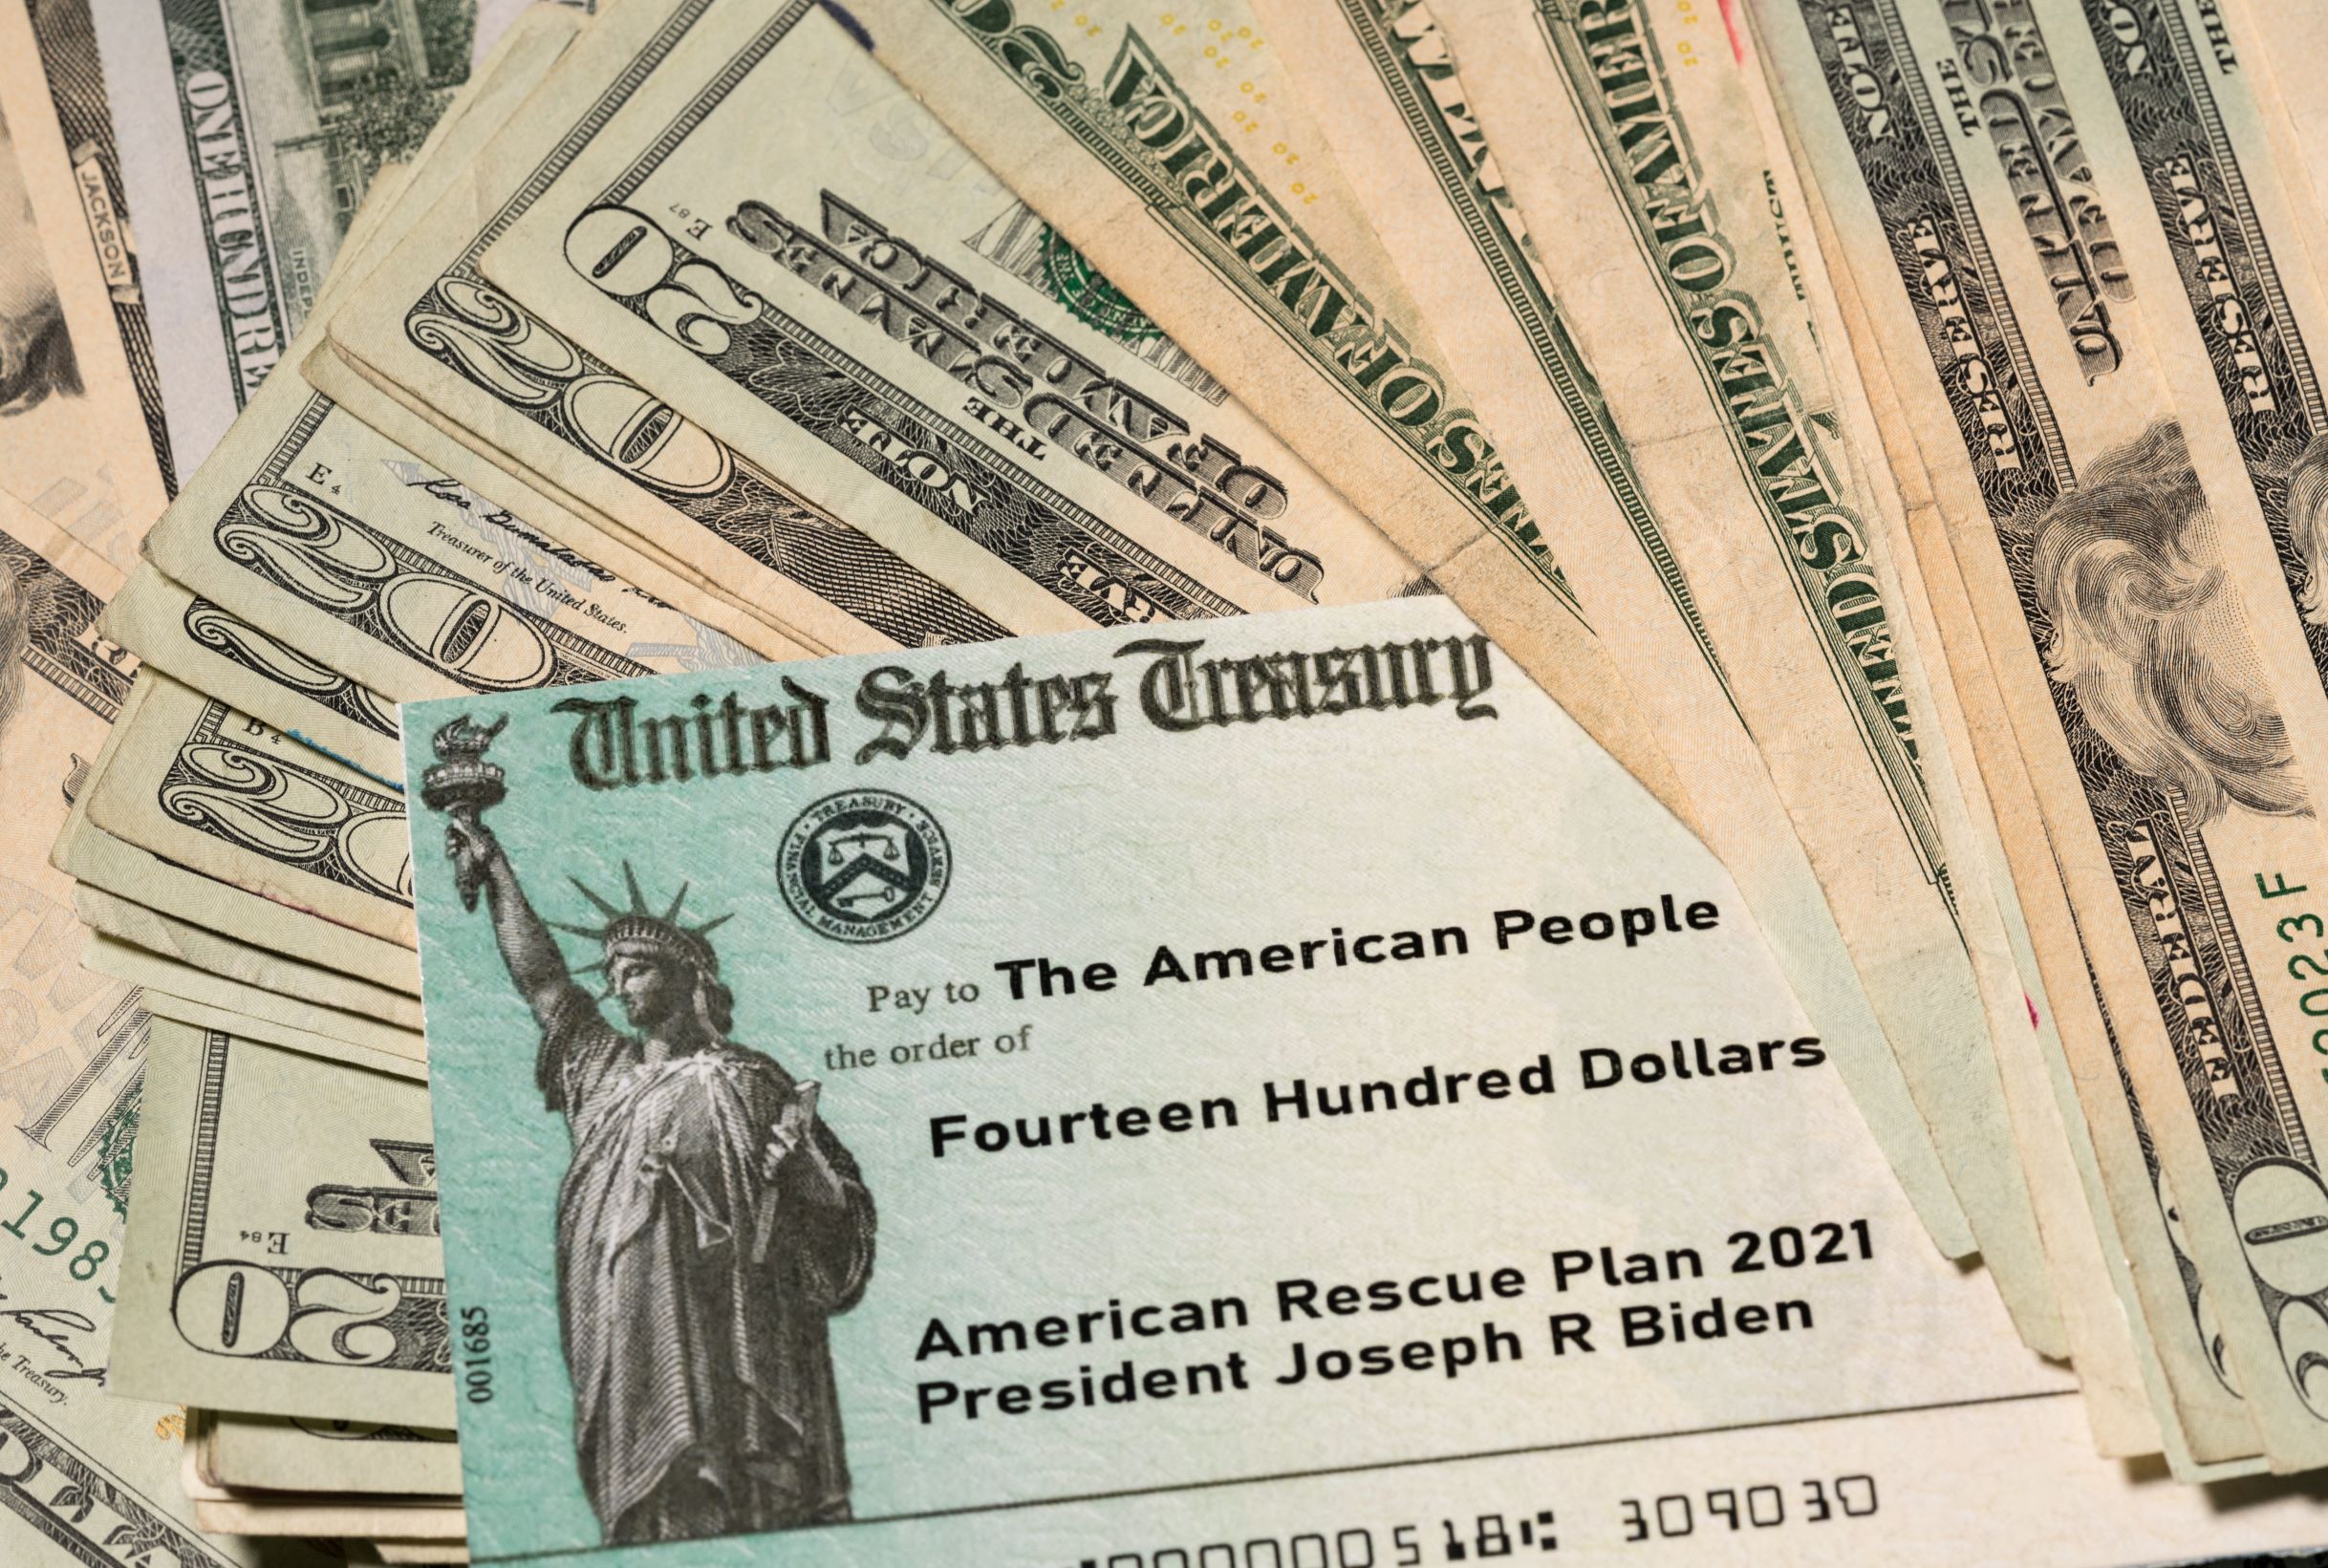 American Rescue Plan Act of 2021